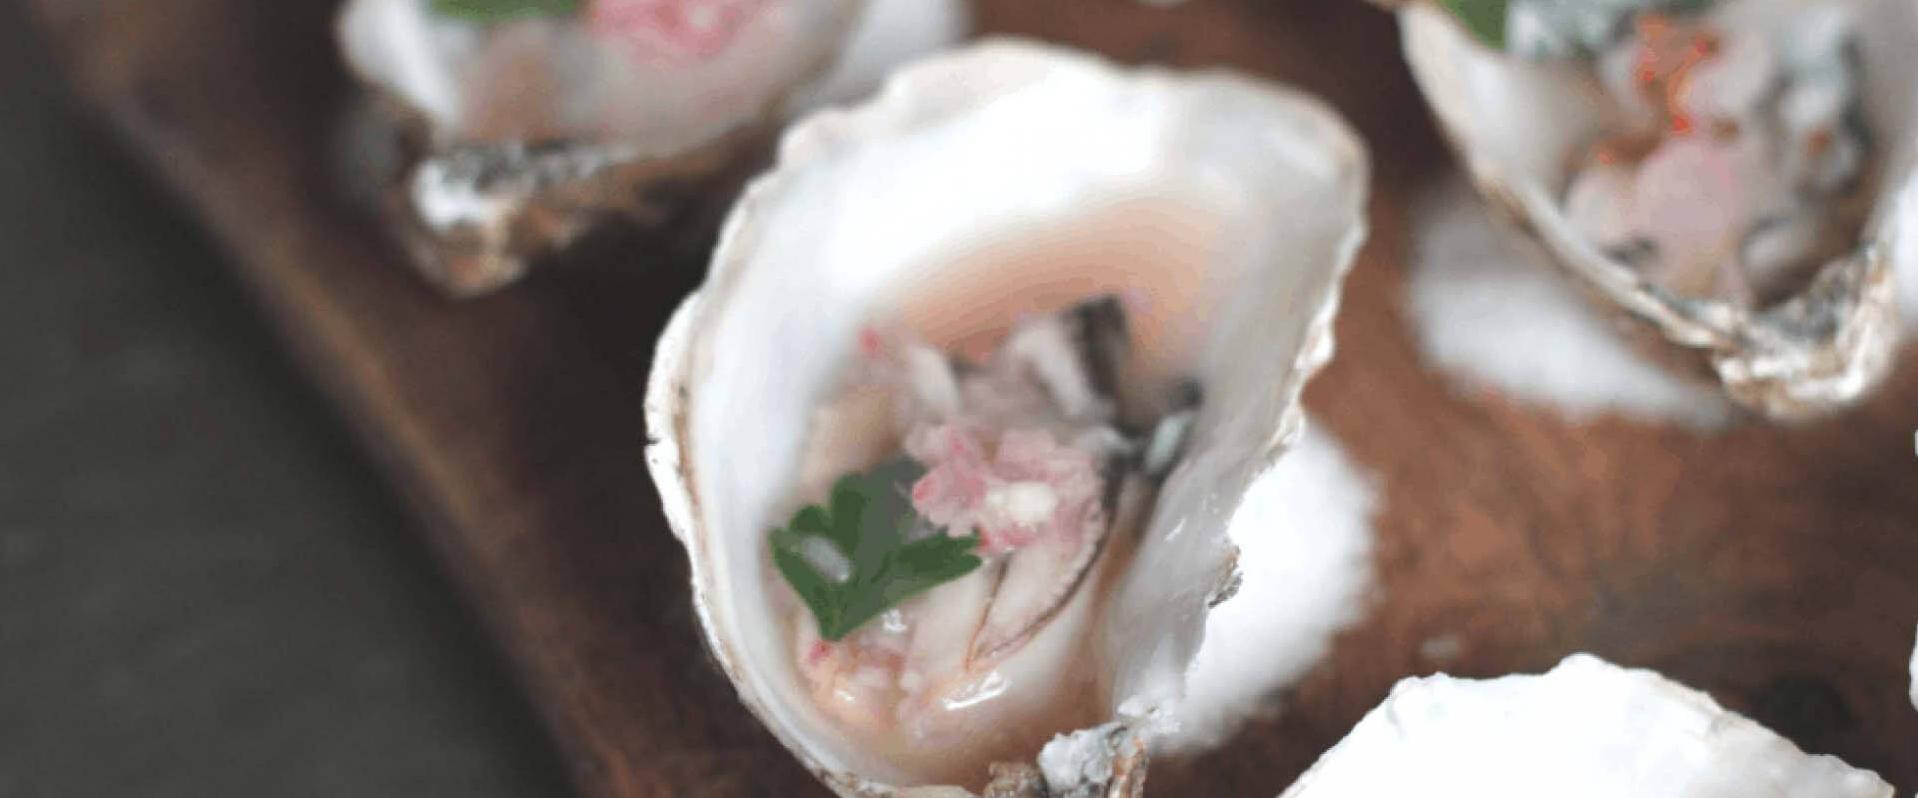  Fresh ingredients are key to making this delicious smoked oyster ceviche style dish.